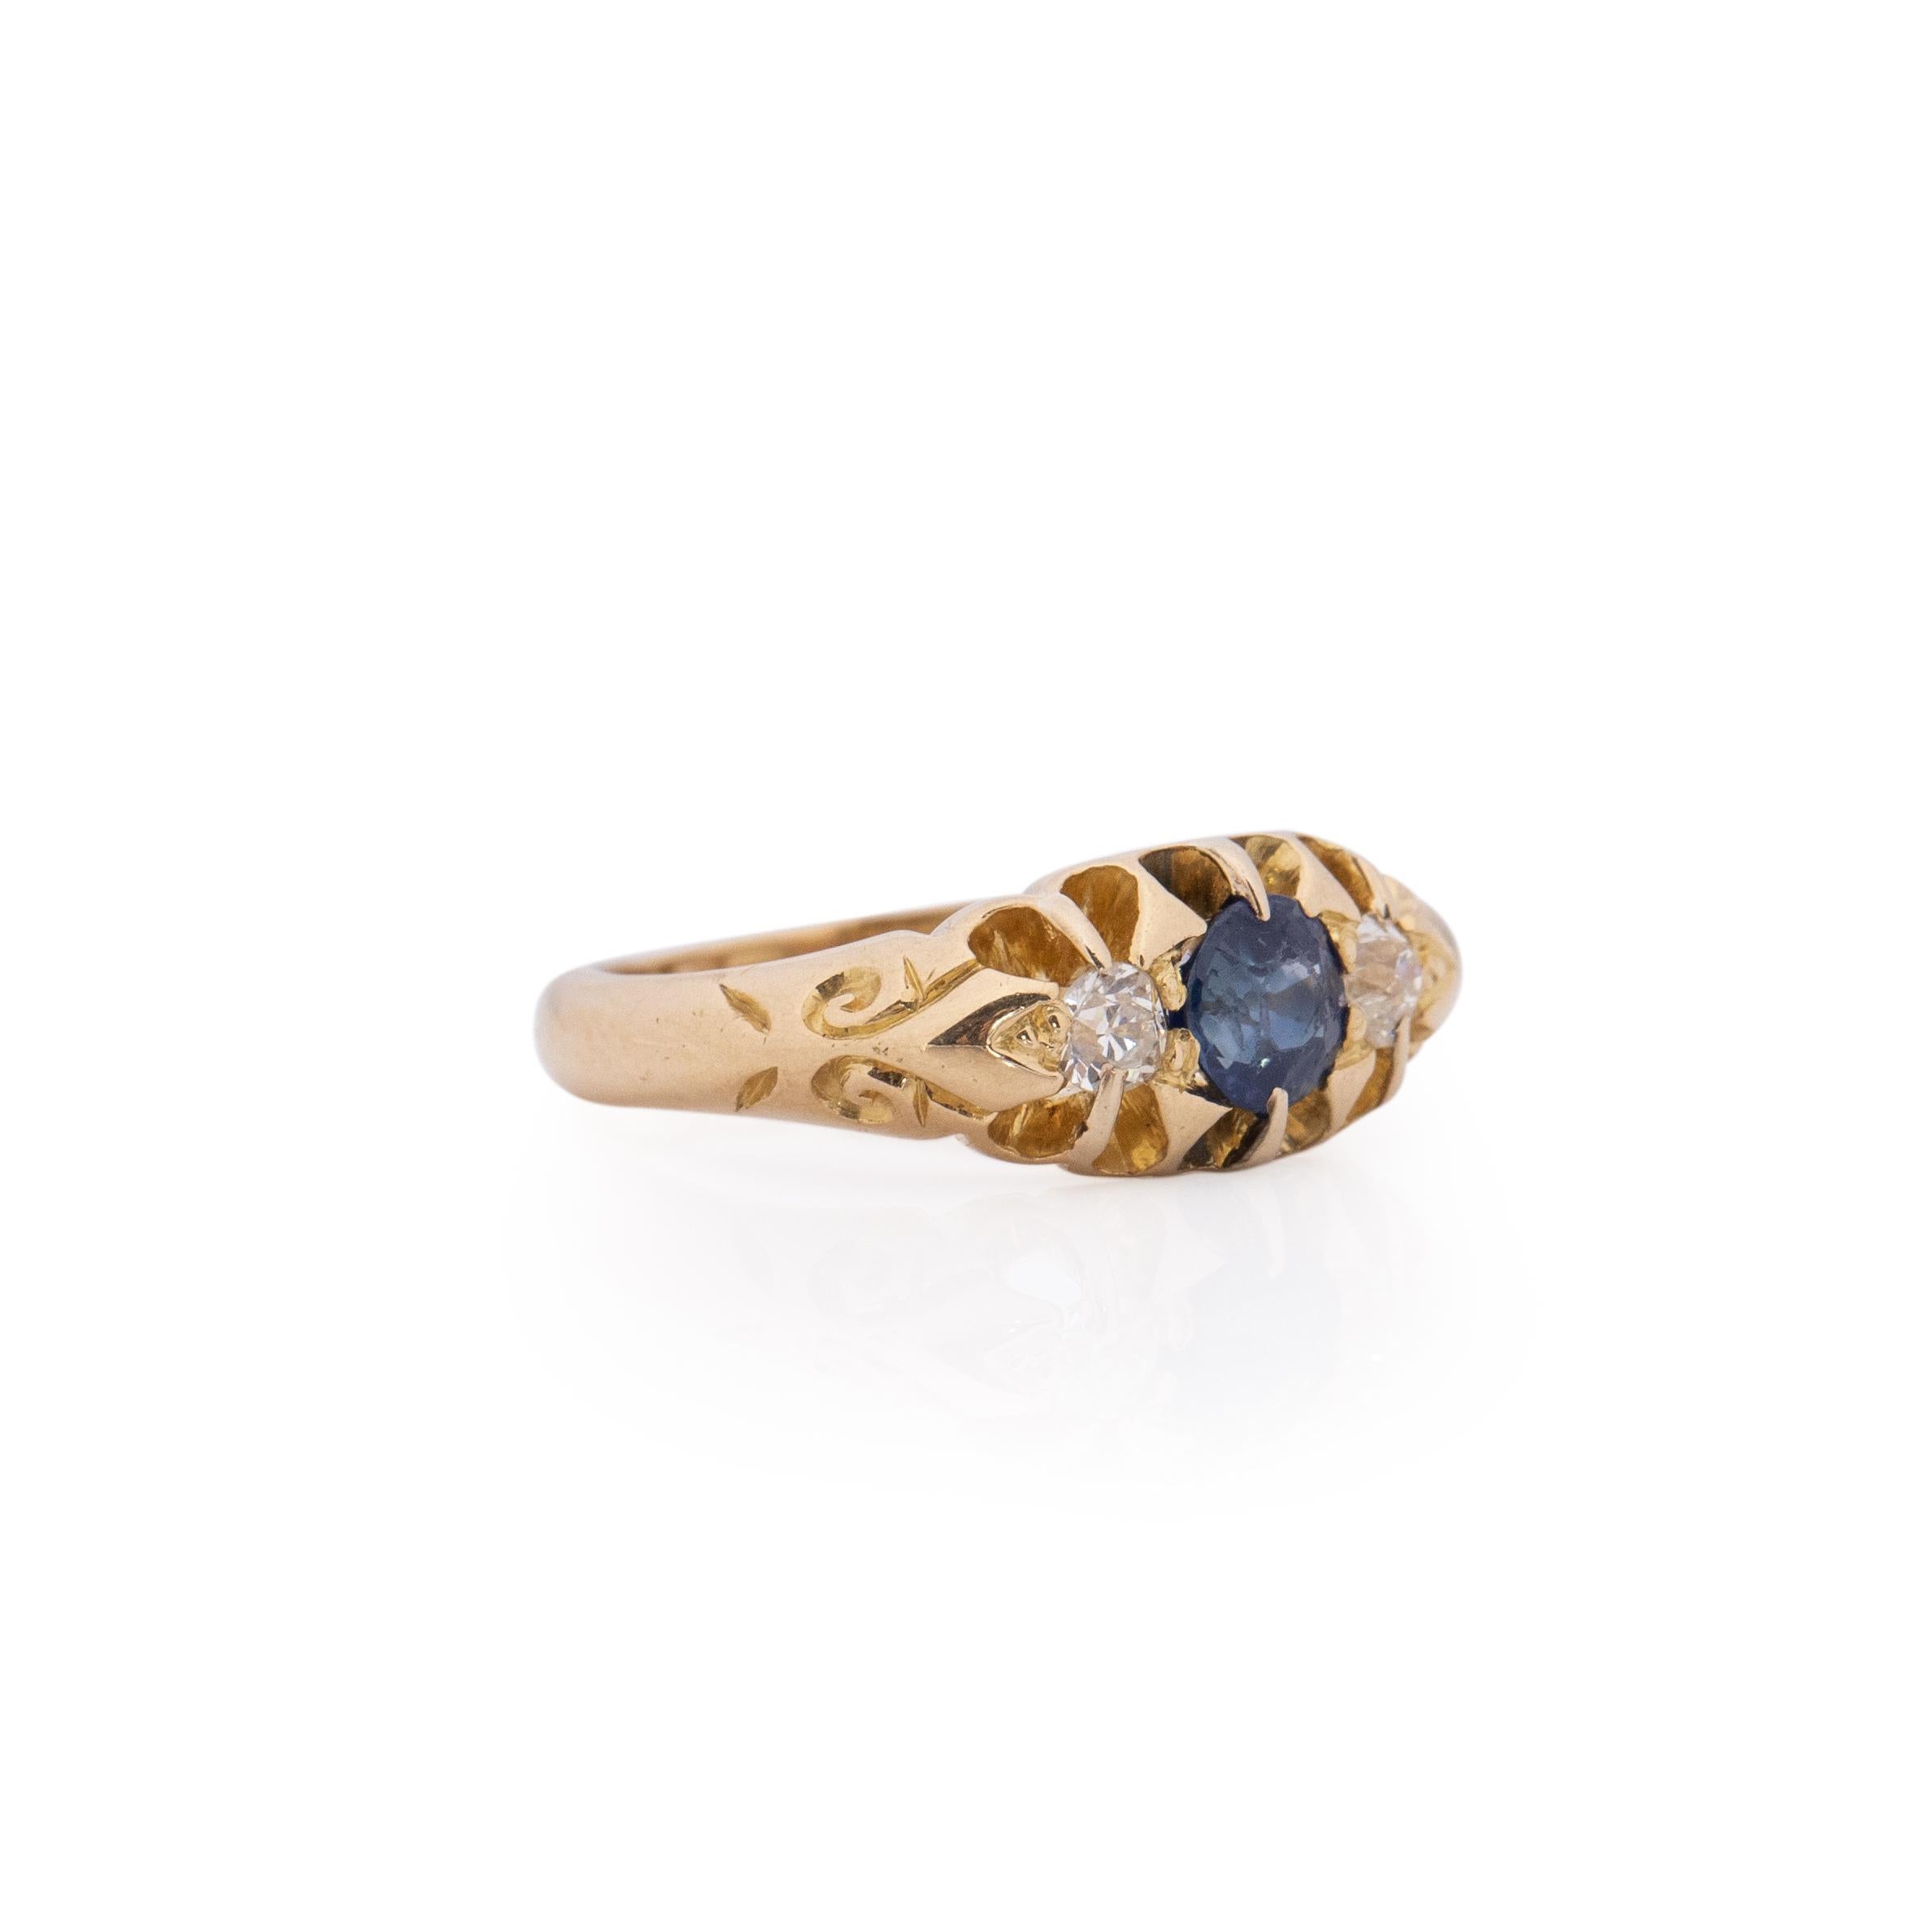 This Victorian ring has a beautiful pop of color with a vibrant blue sapphire showcased right in the center of two beautifully cut diamonds. Crafted in 18K yellow gold this color is the perfect contrast the the sapphire. This ring would make a